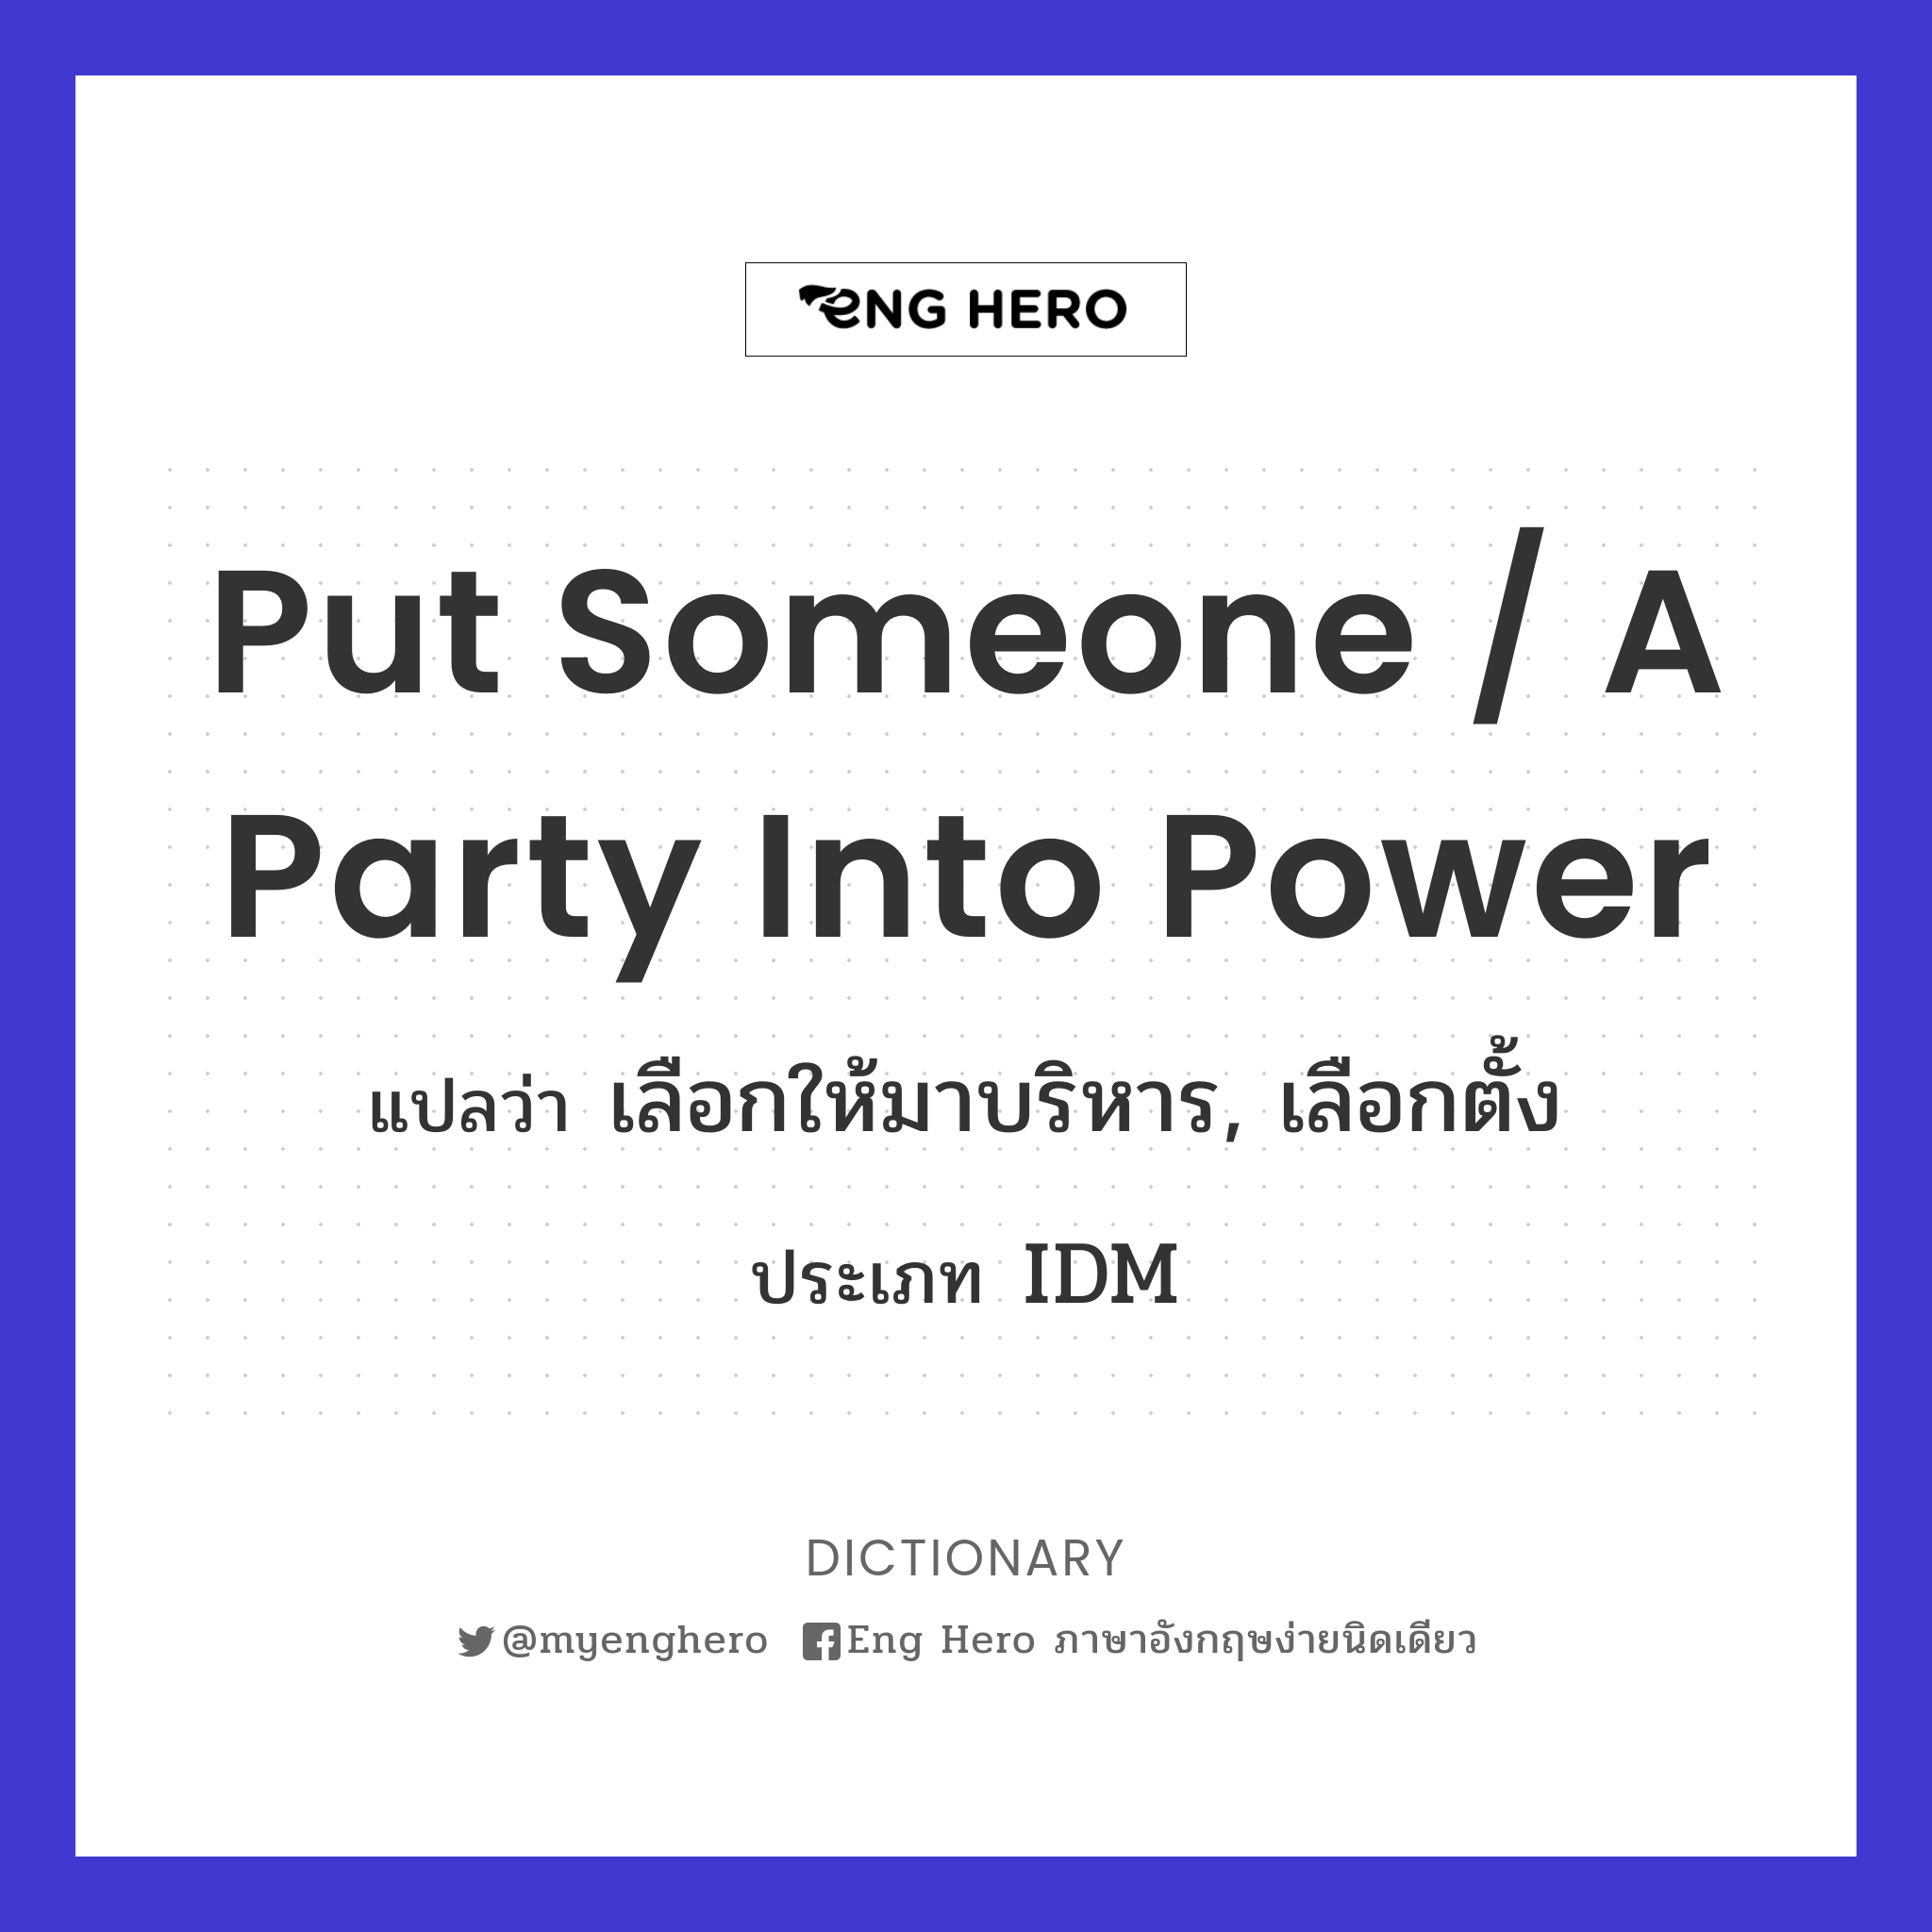 put someone / a party into power